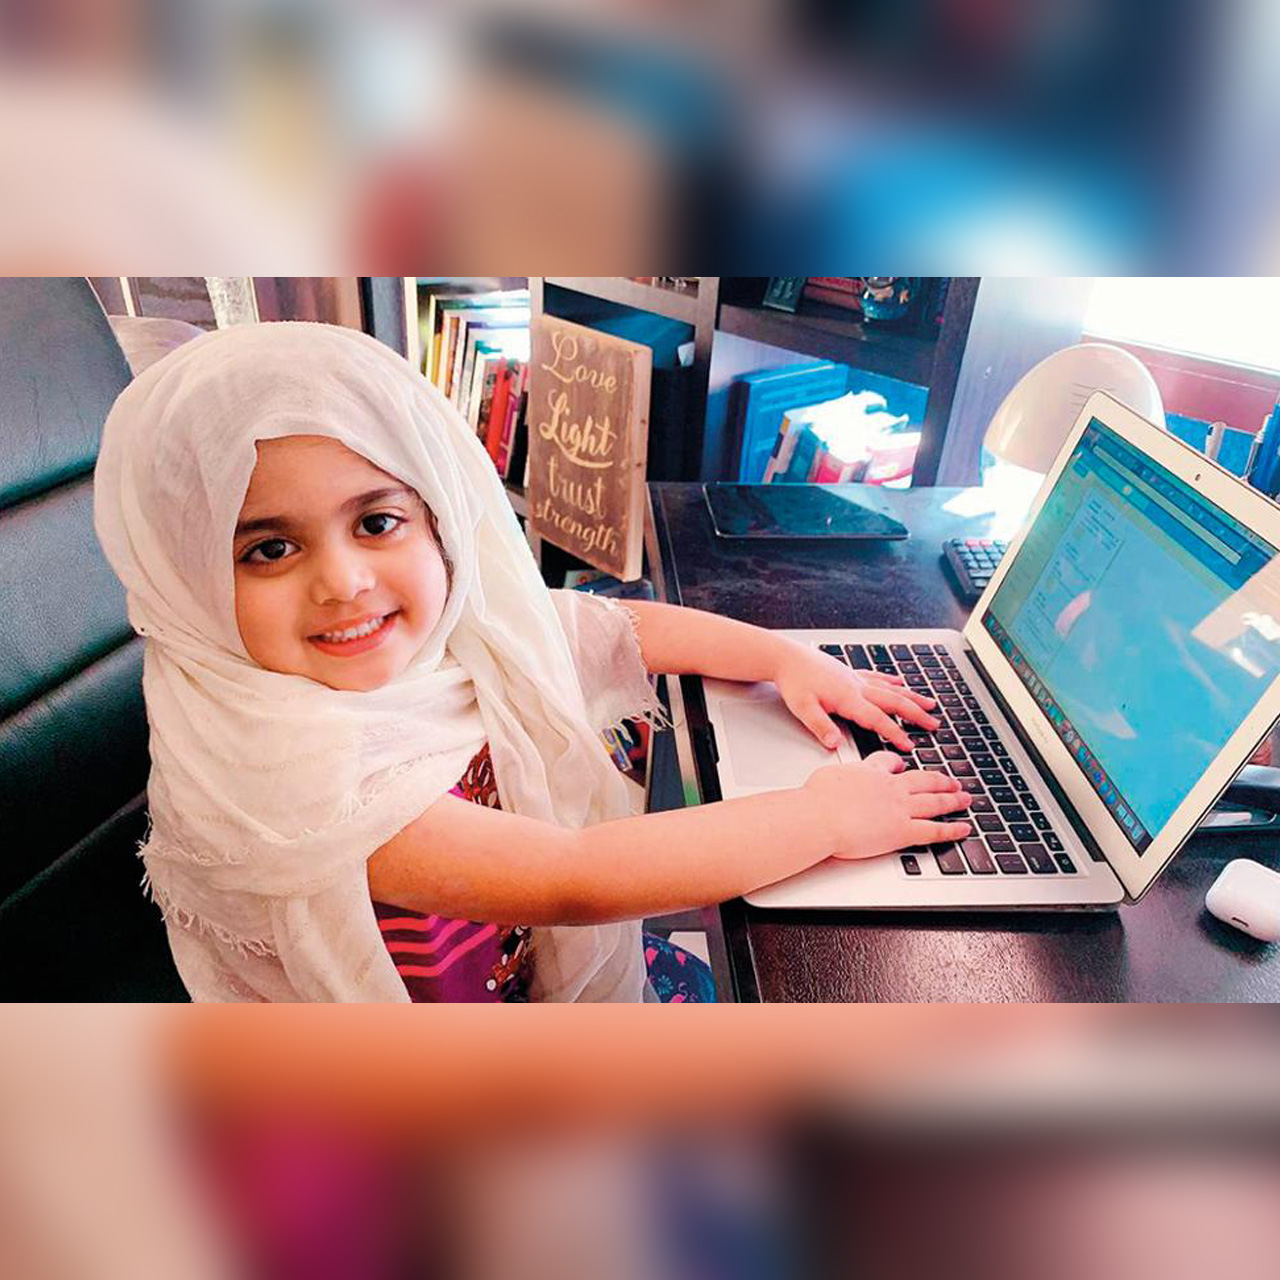 This summer camp makes e-learning fun and engaging for kids